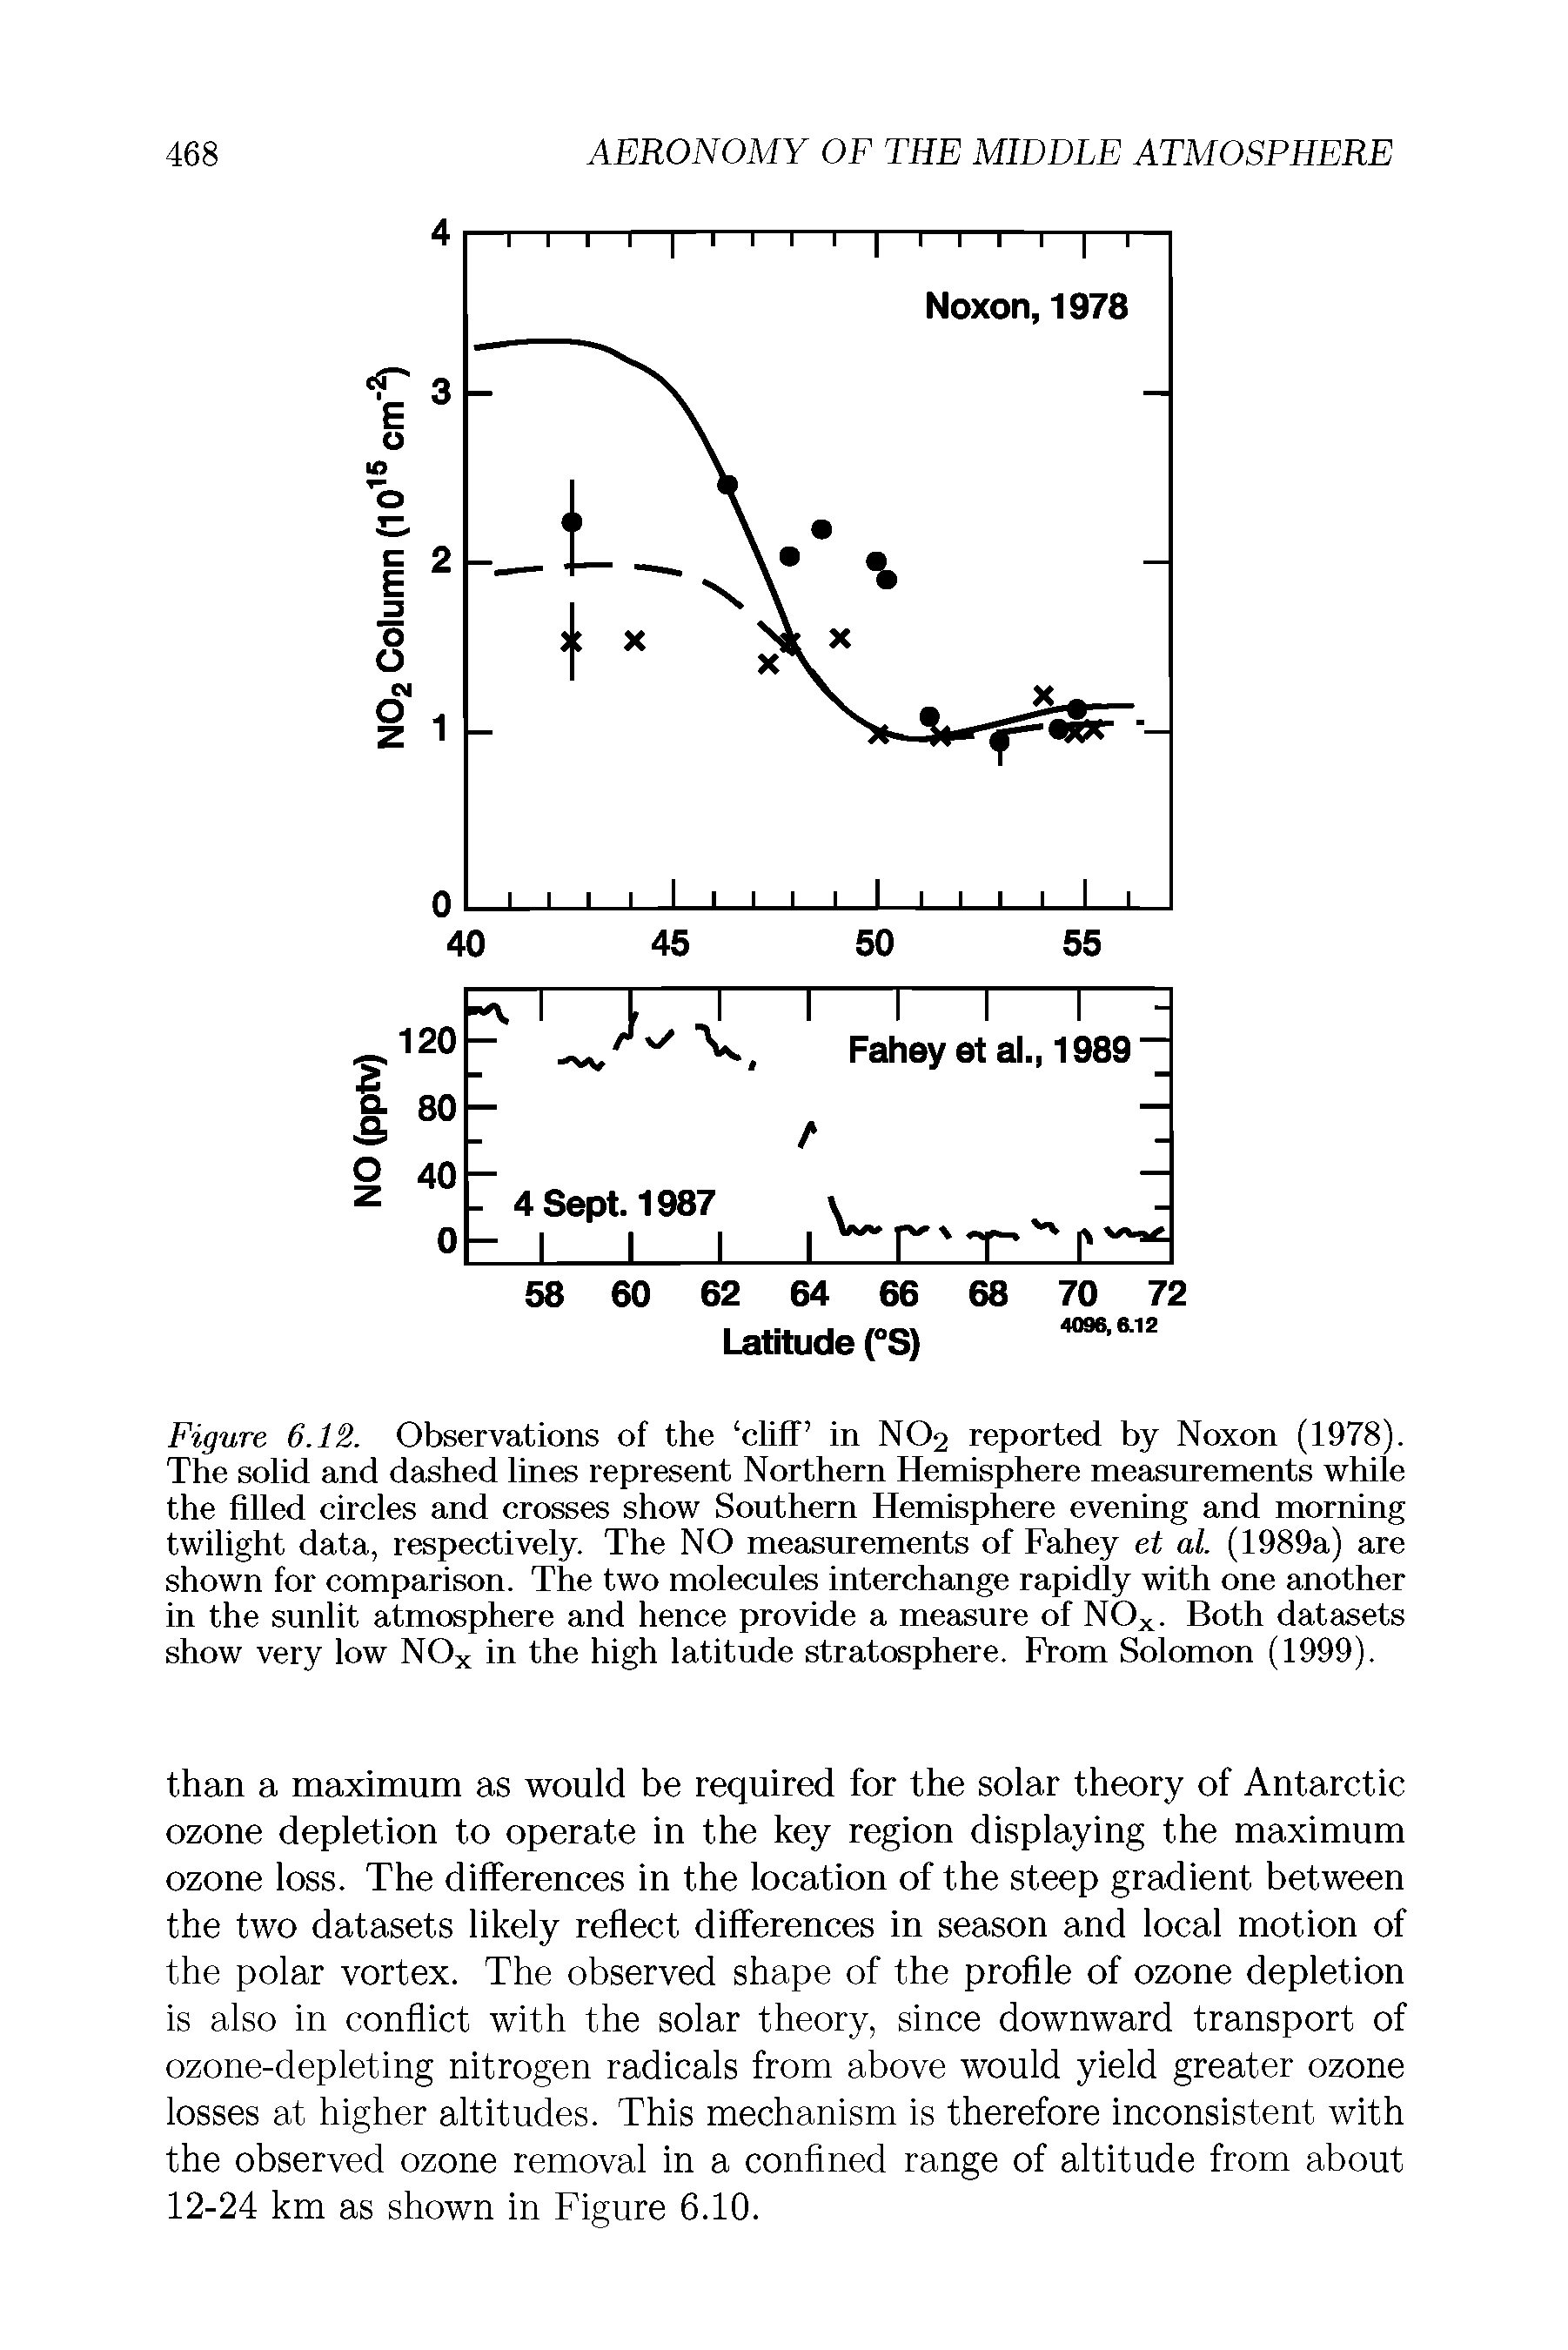 Figure 6.12. Observations of the cliff in NO2 reported by Noxon (1978). The solid and dashed lines represent Northern Hemisphere measurements while the filled circles and crosses show Southern Hemisphere evening and morning twilight data, respectively. The NO measurements of Fahey et al. (1989a) are shown for comparison. The two molecules interchange rapidly with one another in the sunlit atmosphere and hence provide a measure of NOx. Both datasets show very low NOx in the high latitude stratosphere. From Solomon (1999).